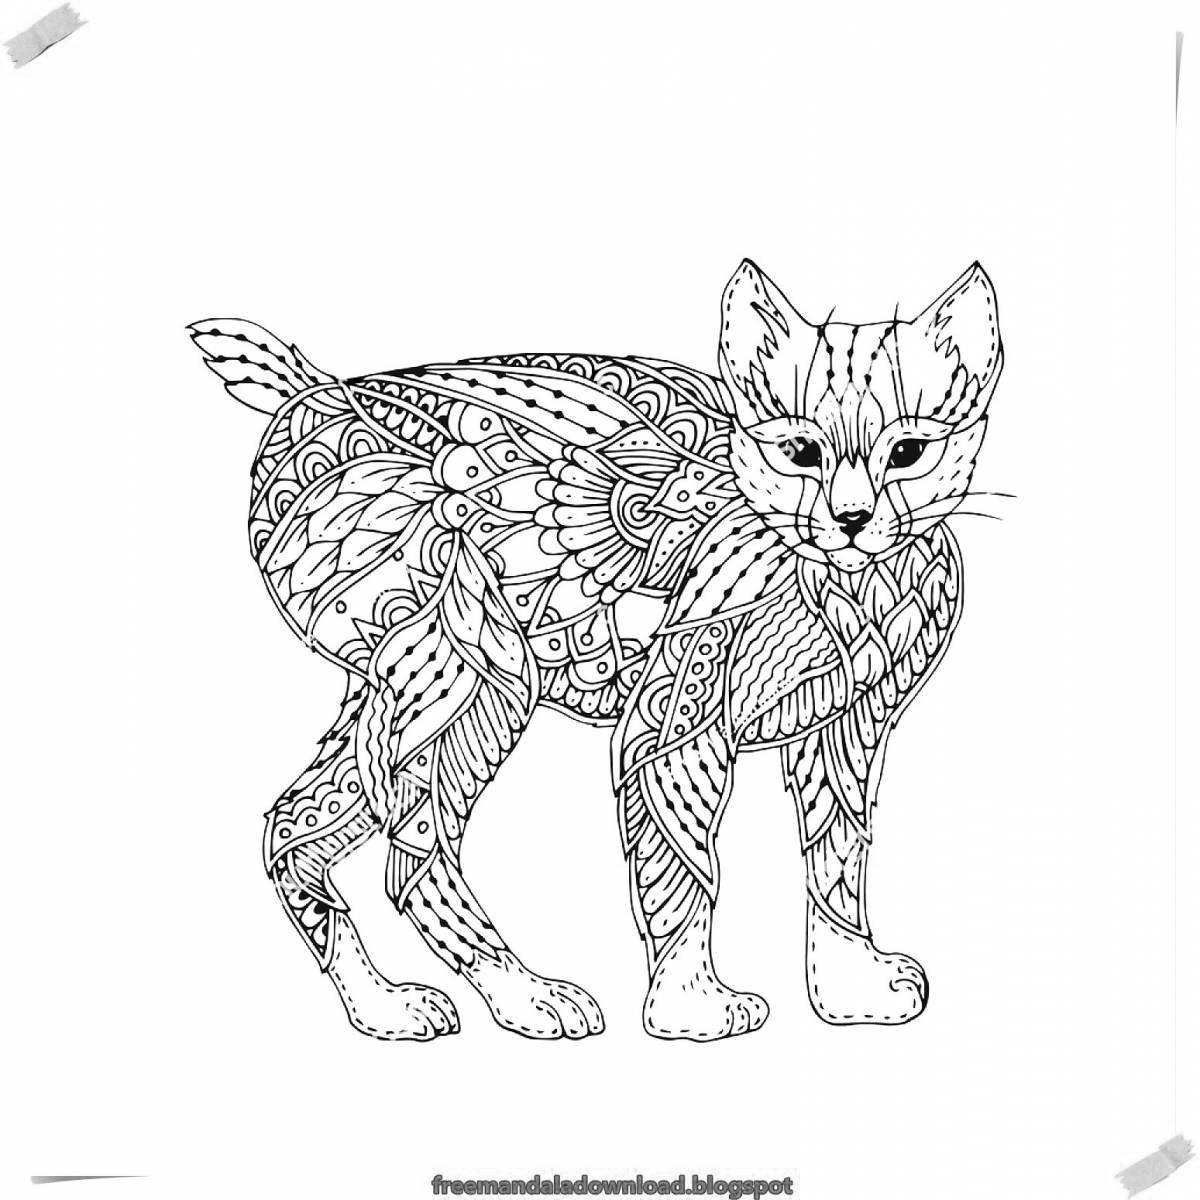 Fancy flying cat coloring book